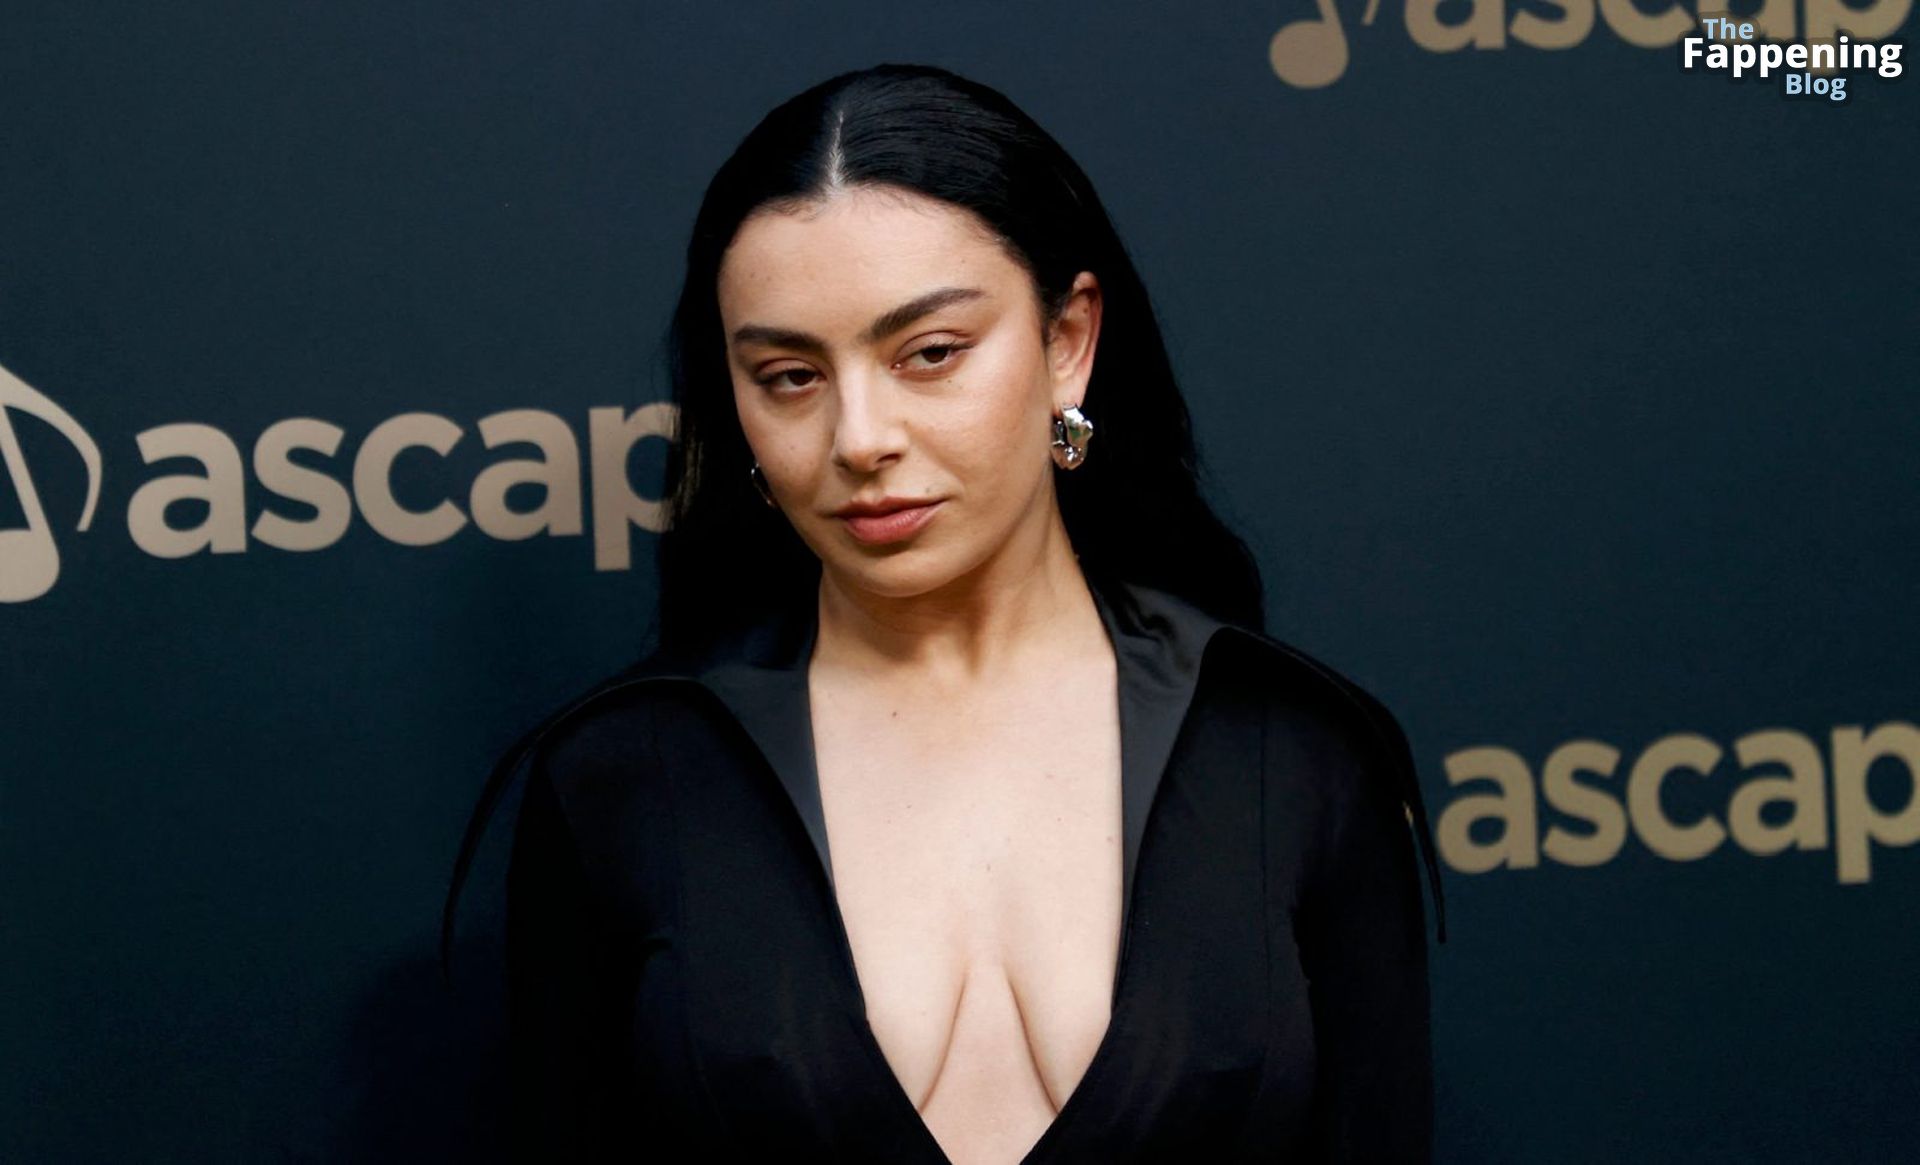 charli-xcx-braless-cleavage-ascap-pop-music-awards-8-thefappeningblog.com_.jpg